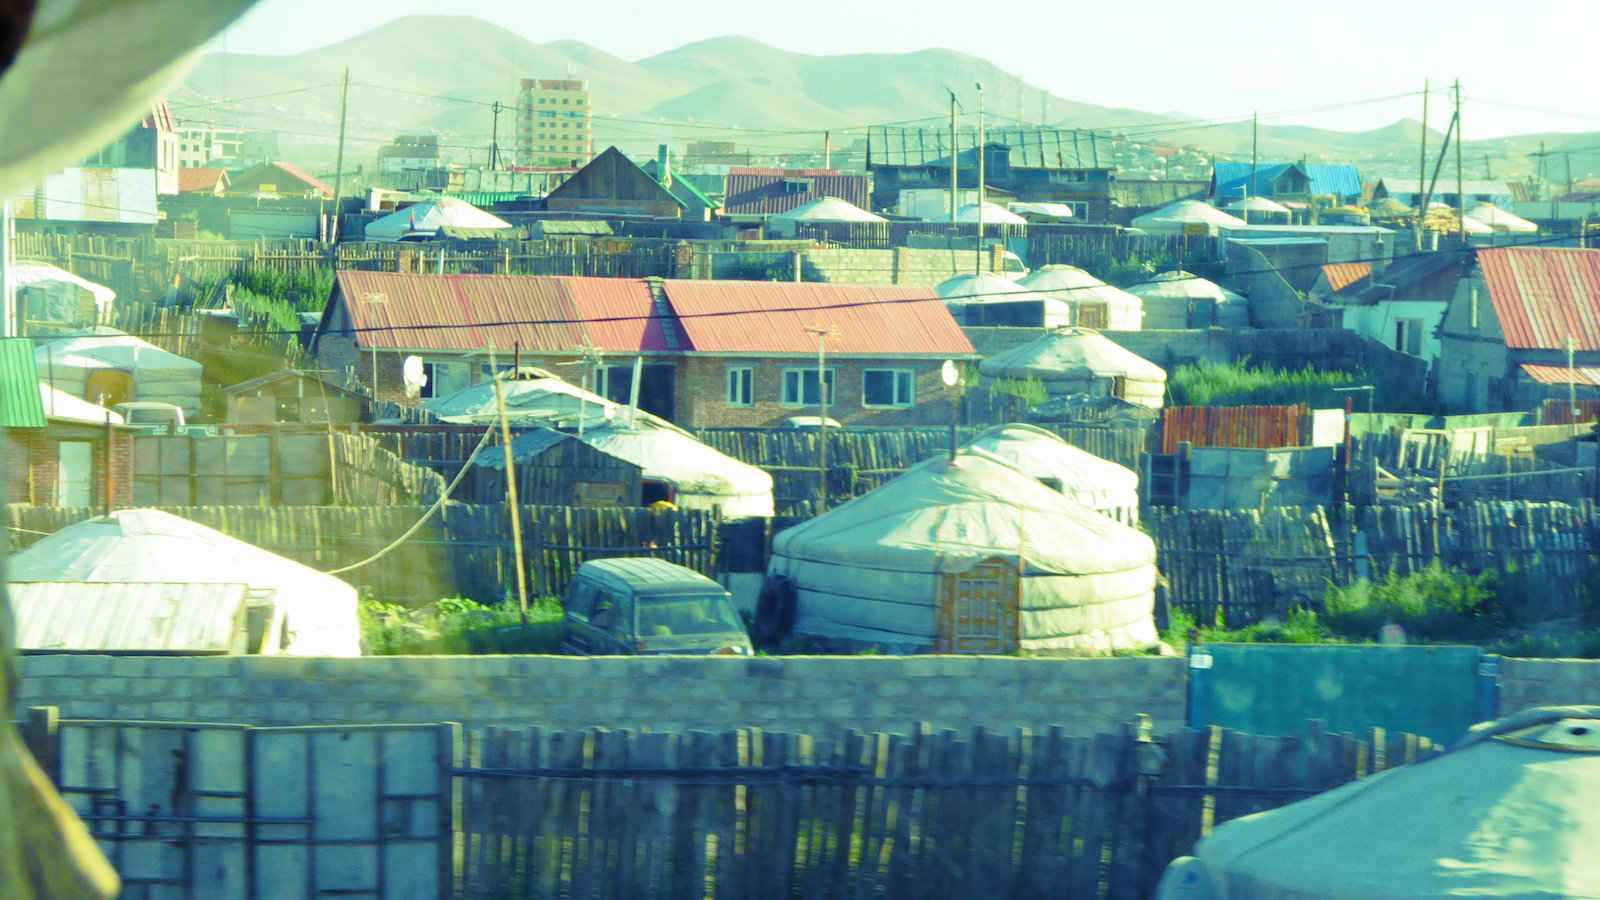 Mongolia's capital Ulaanbaatar is one of the most polluted capital cities in the world